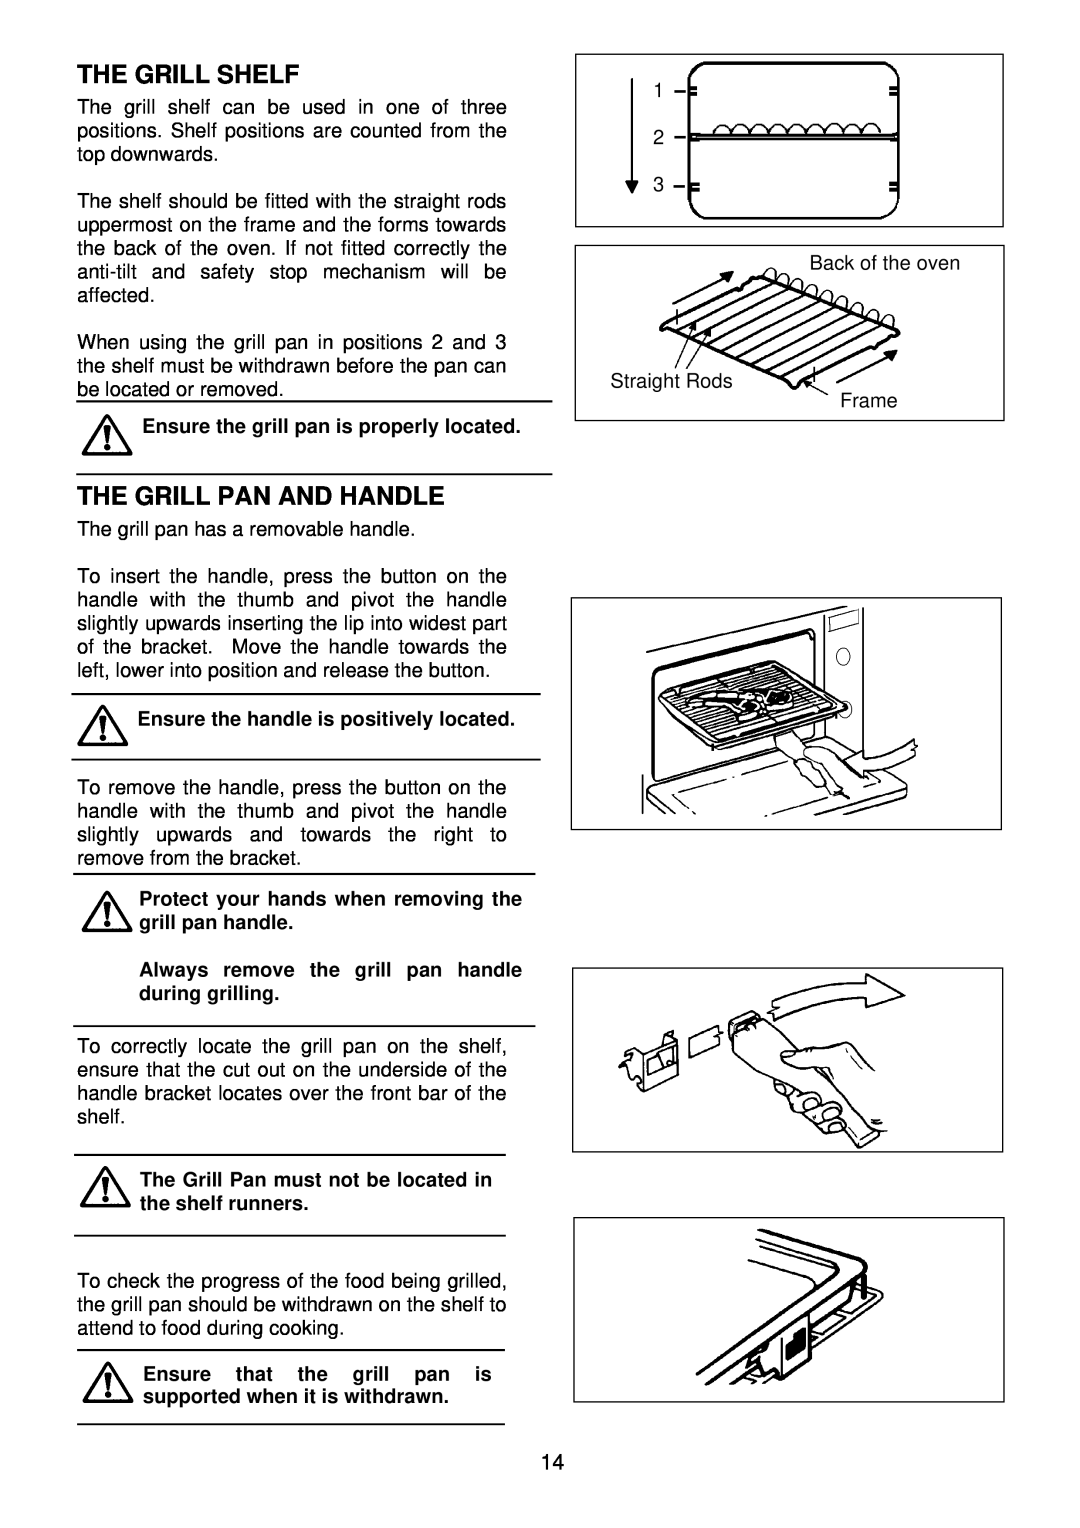 Electrolux EDB 872 manual The Grill Shelf, The Grill Pan And Handle, Ensure the grill pan is properly located 